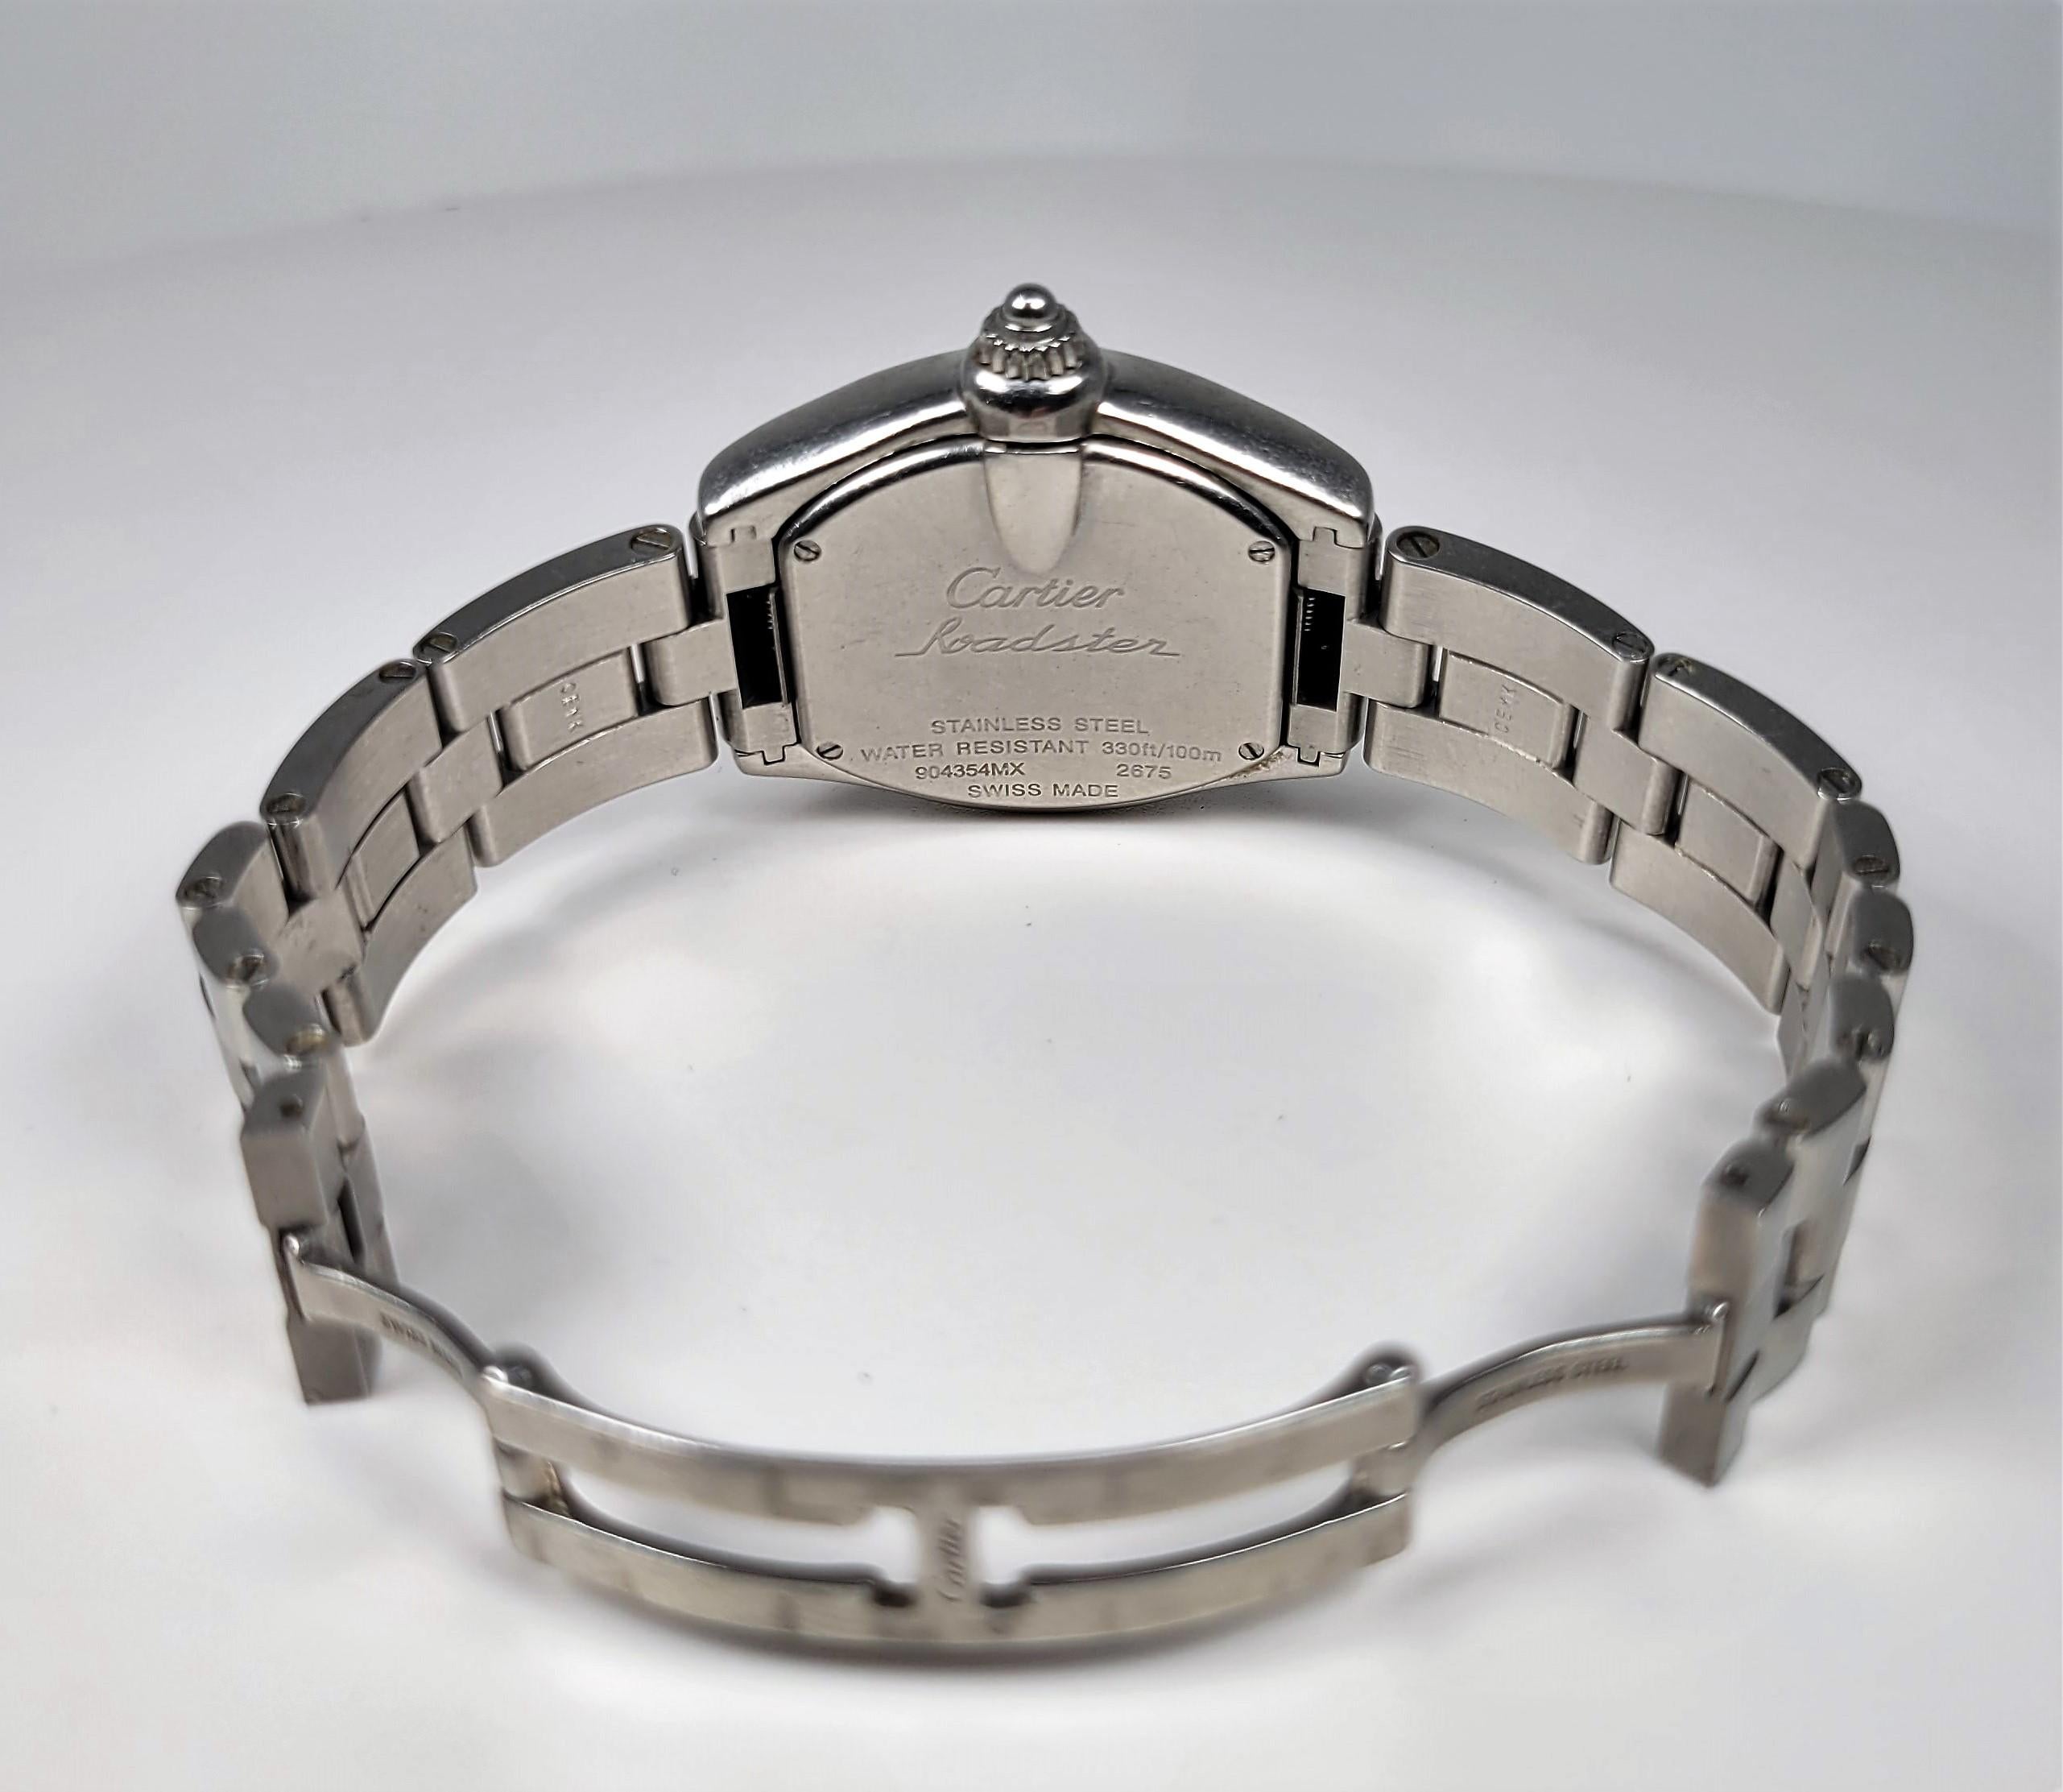 In stainless steel, this Cartier Roadster wrist watch is such a timeless design!

The wrist watch is accompanied by the original Cartier box, an extra leather strap and two additional stainless steel links.  The interior measurement of the bracelet